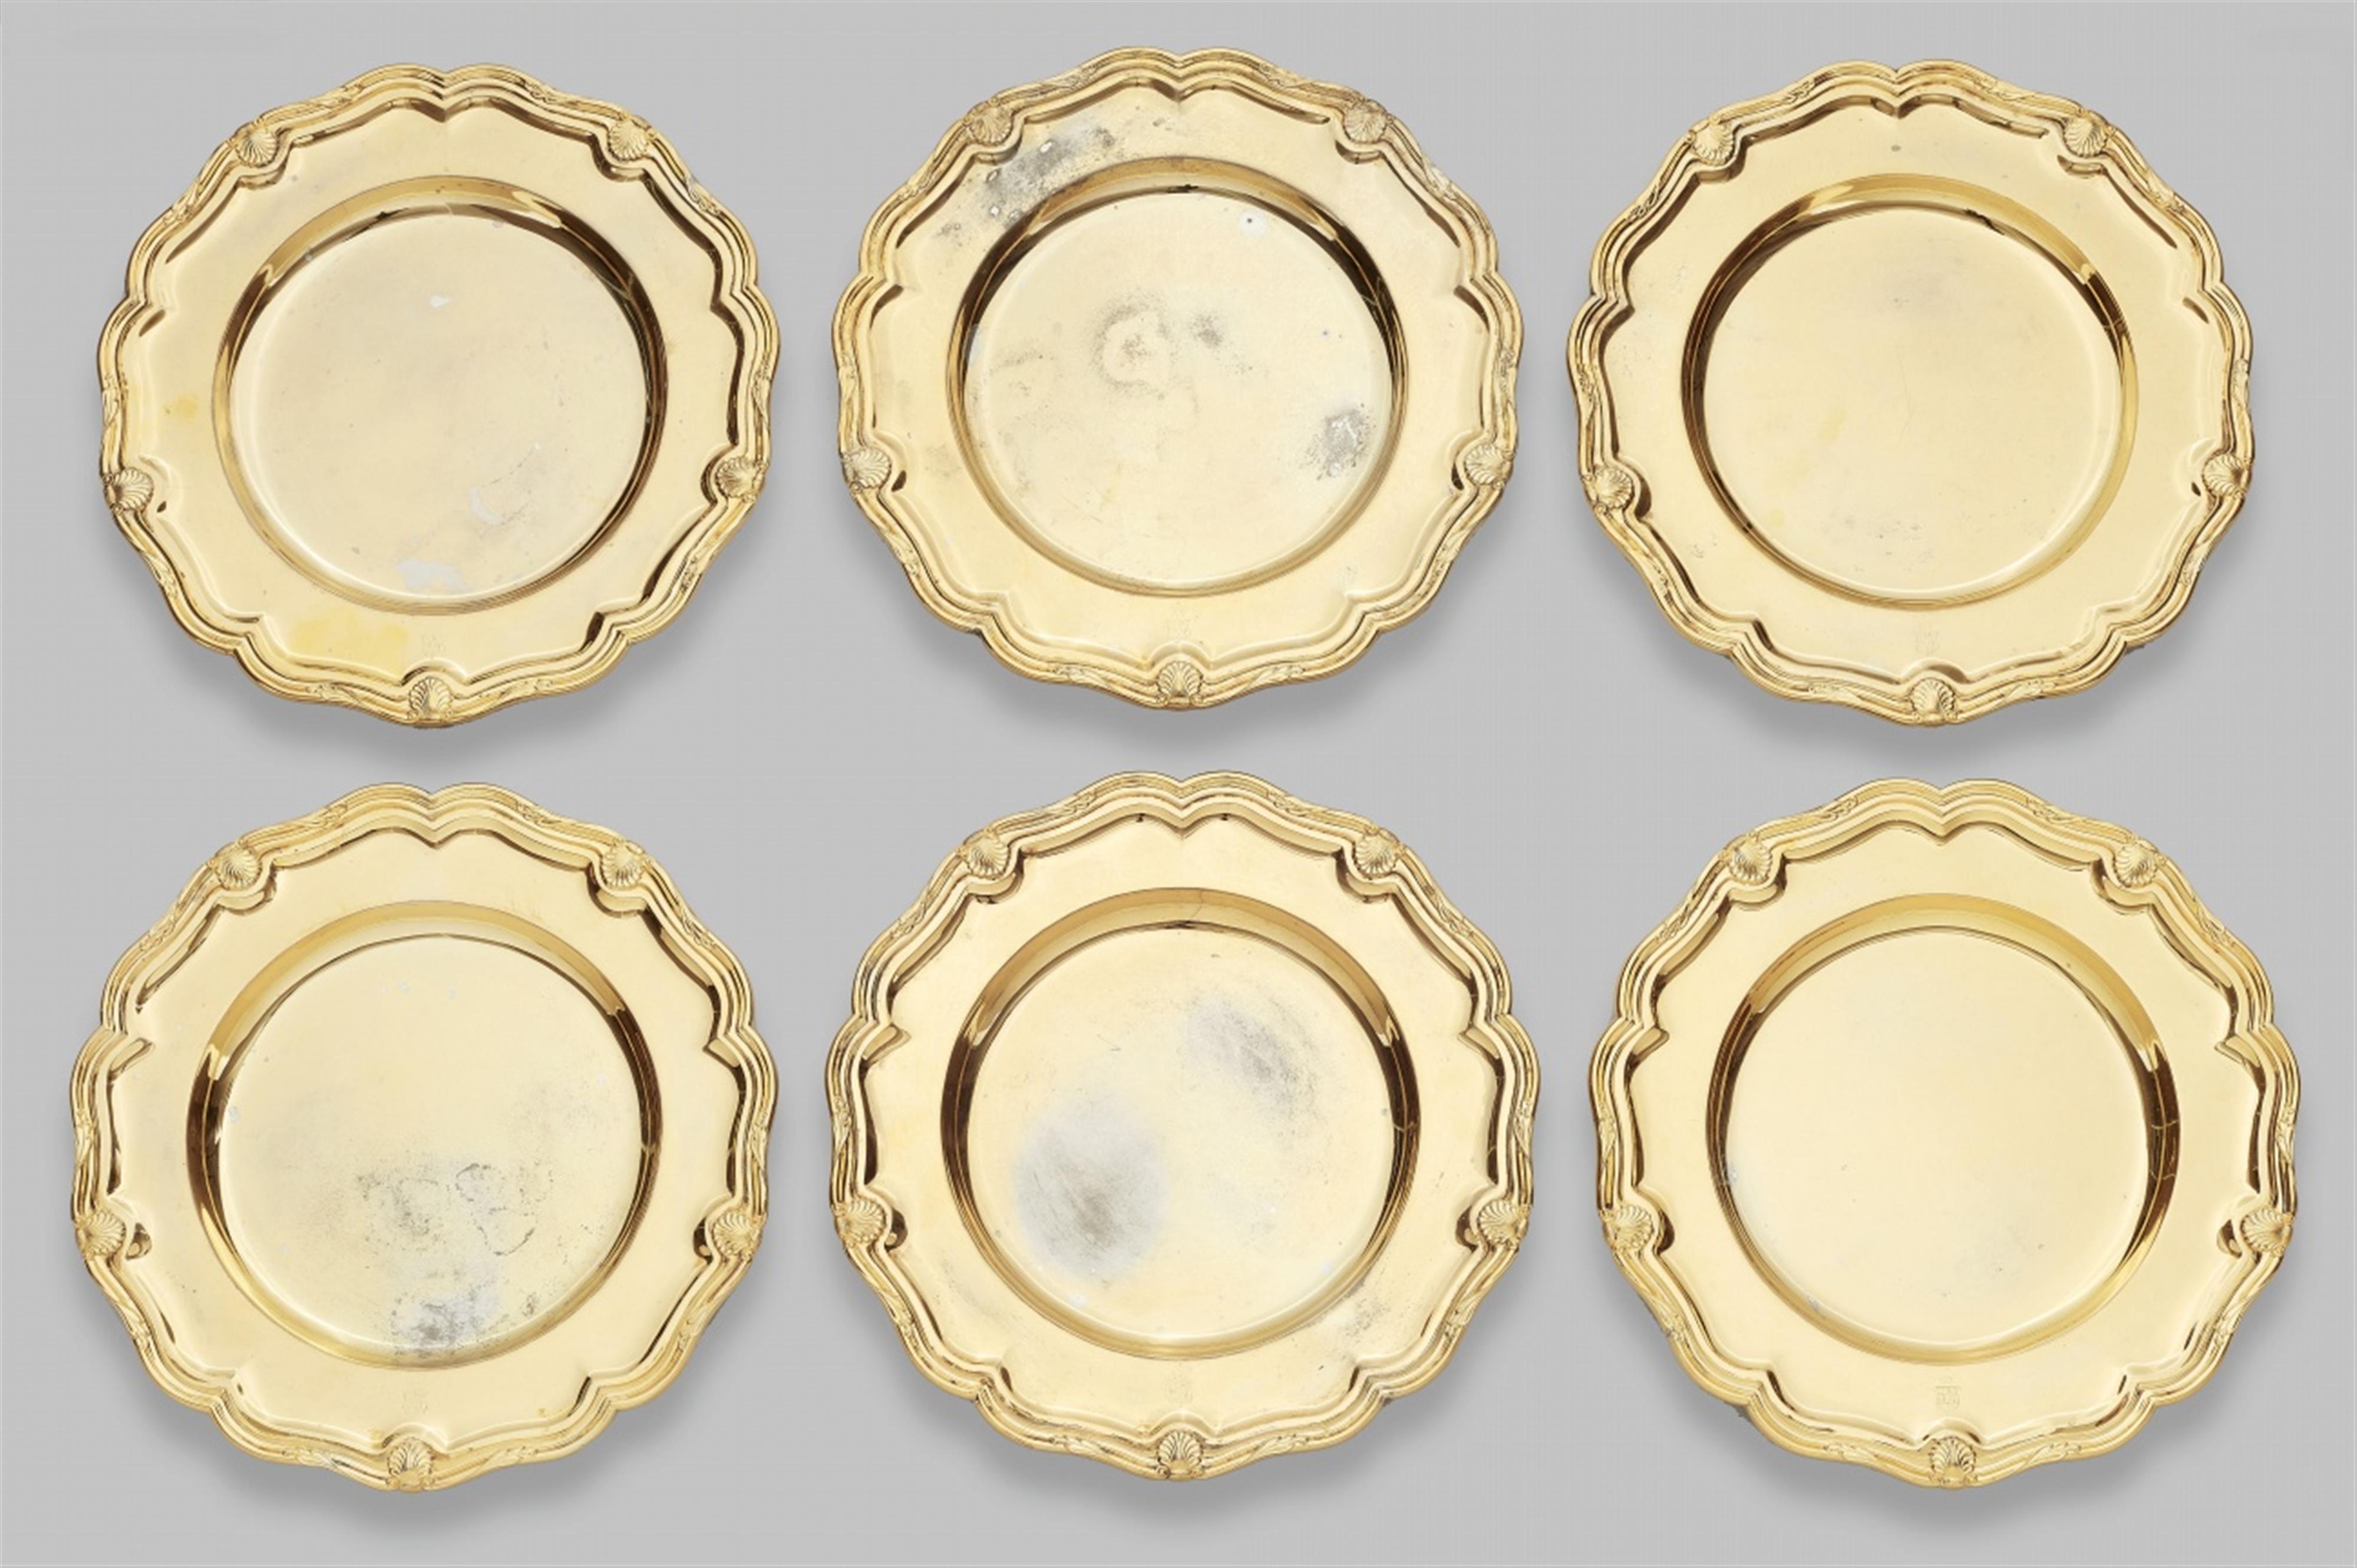 12 Berlin silver gilt plates made for the Grand Dukes of Mecklenburg-Schwerin - image-3